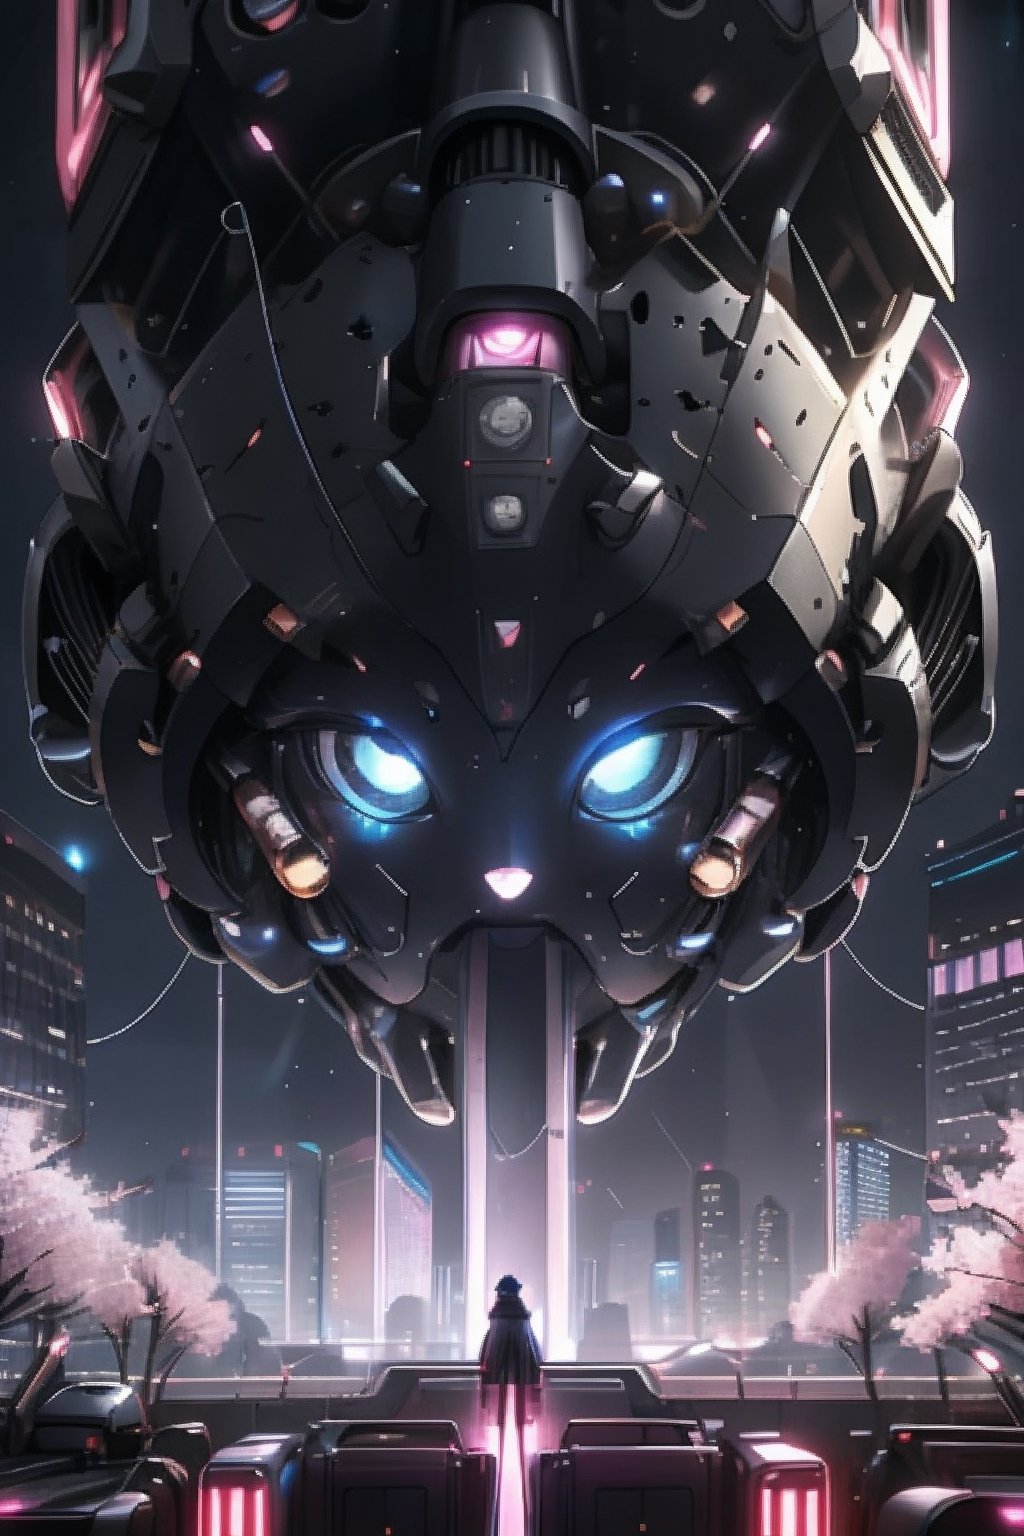 Imagine a futuristic cityscape where towering skyscrapers gleam against a twilight sky, illuminated by neon lights and holographic advertisements. In the foreground, a young cyborg protagonist stands atop a building, their sleek metallic limbs reflecting the city's glow. Their expression is determined yet contemplative, hinting at a backstory of resilience and inner conflict.Surrounding the protagonist are elements of both technology and nature, seamlessly intertwined. Perhaps there are hovering drones buzzing around, carrying out surveillance or delivery tasks, while cherry blossom trees bloom amidst the concrete jungle, symbolizing beauty and fragility in this high-tech world.In the distance, a colossal megastructure looms, hinting at the central conflict or mystery of the narrative. Is it a corporate headquarters, a government facility, or something more sinister? The sky above crackles with energy, suggesting impending change or upheaval.